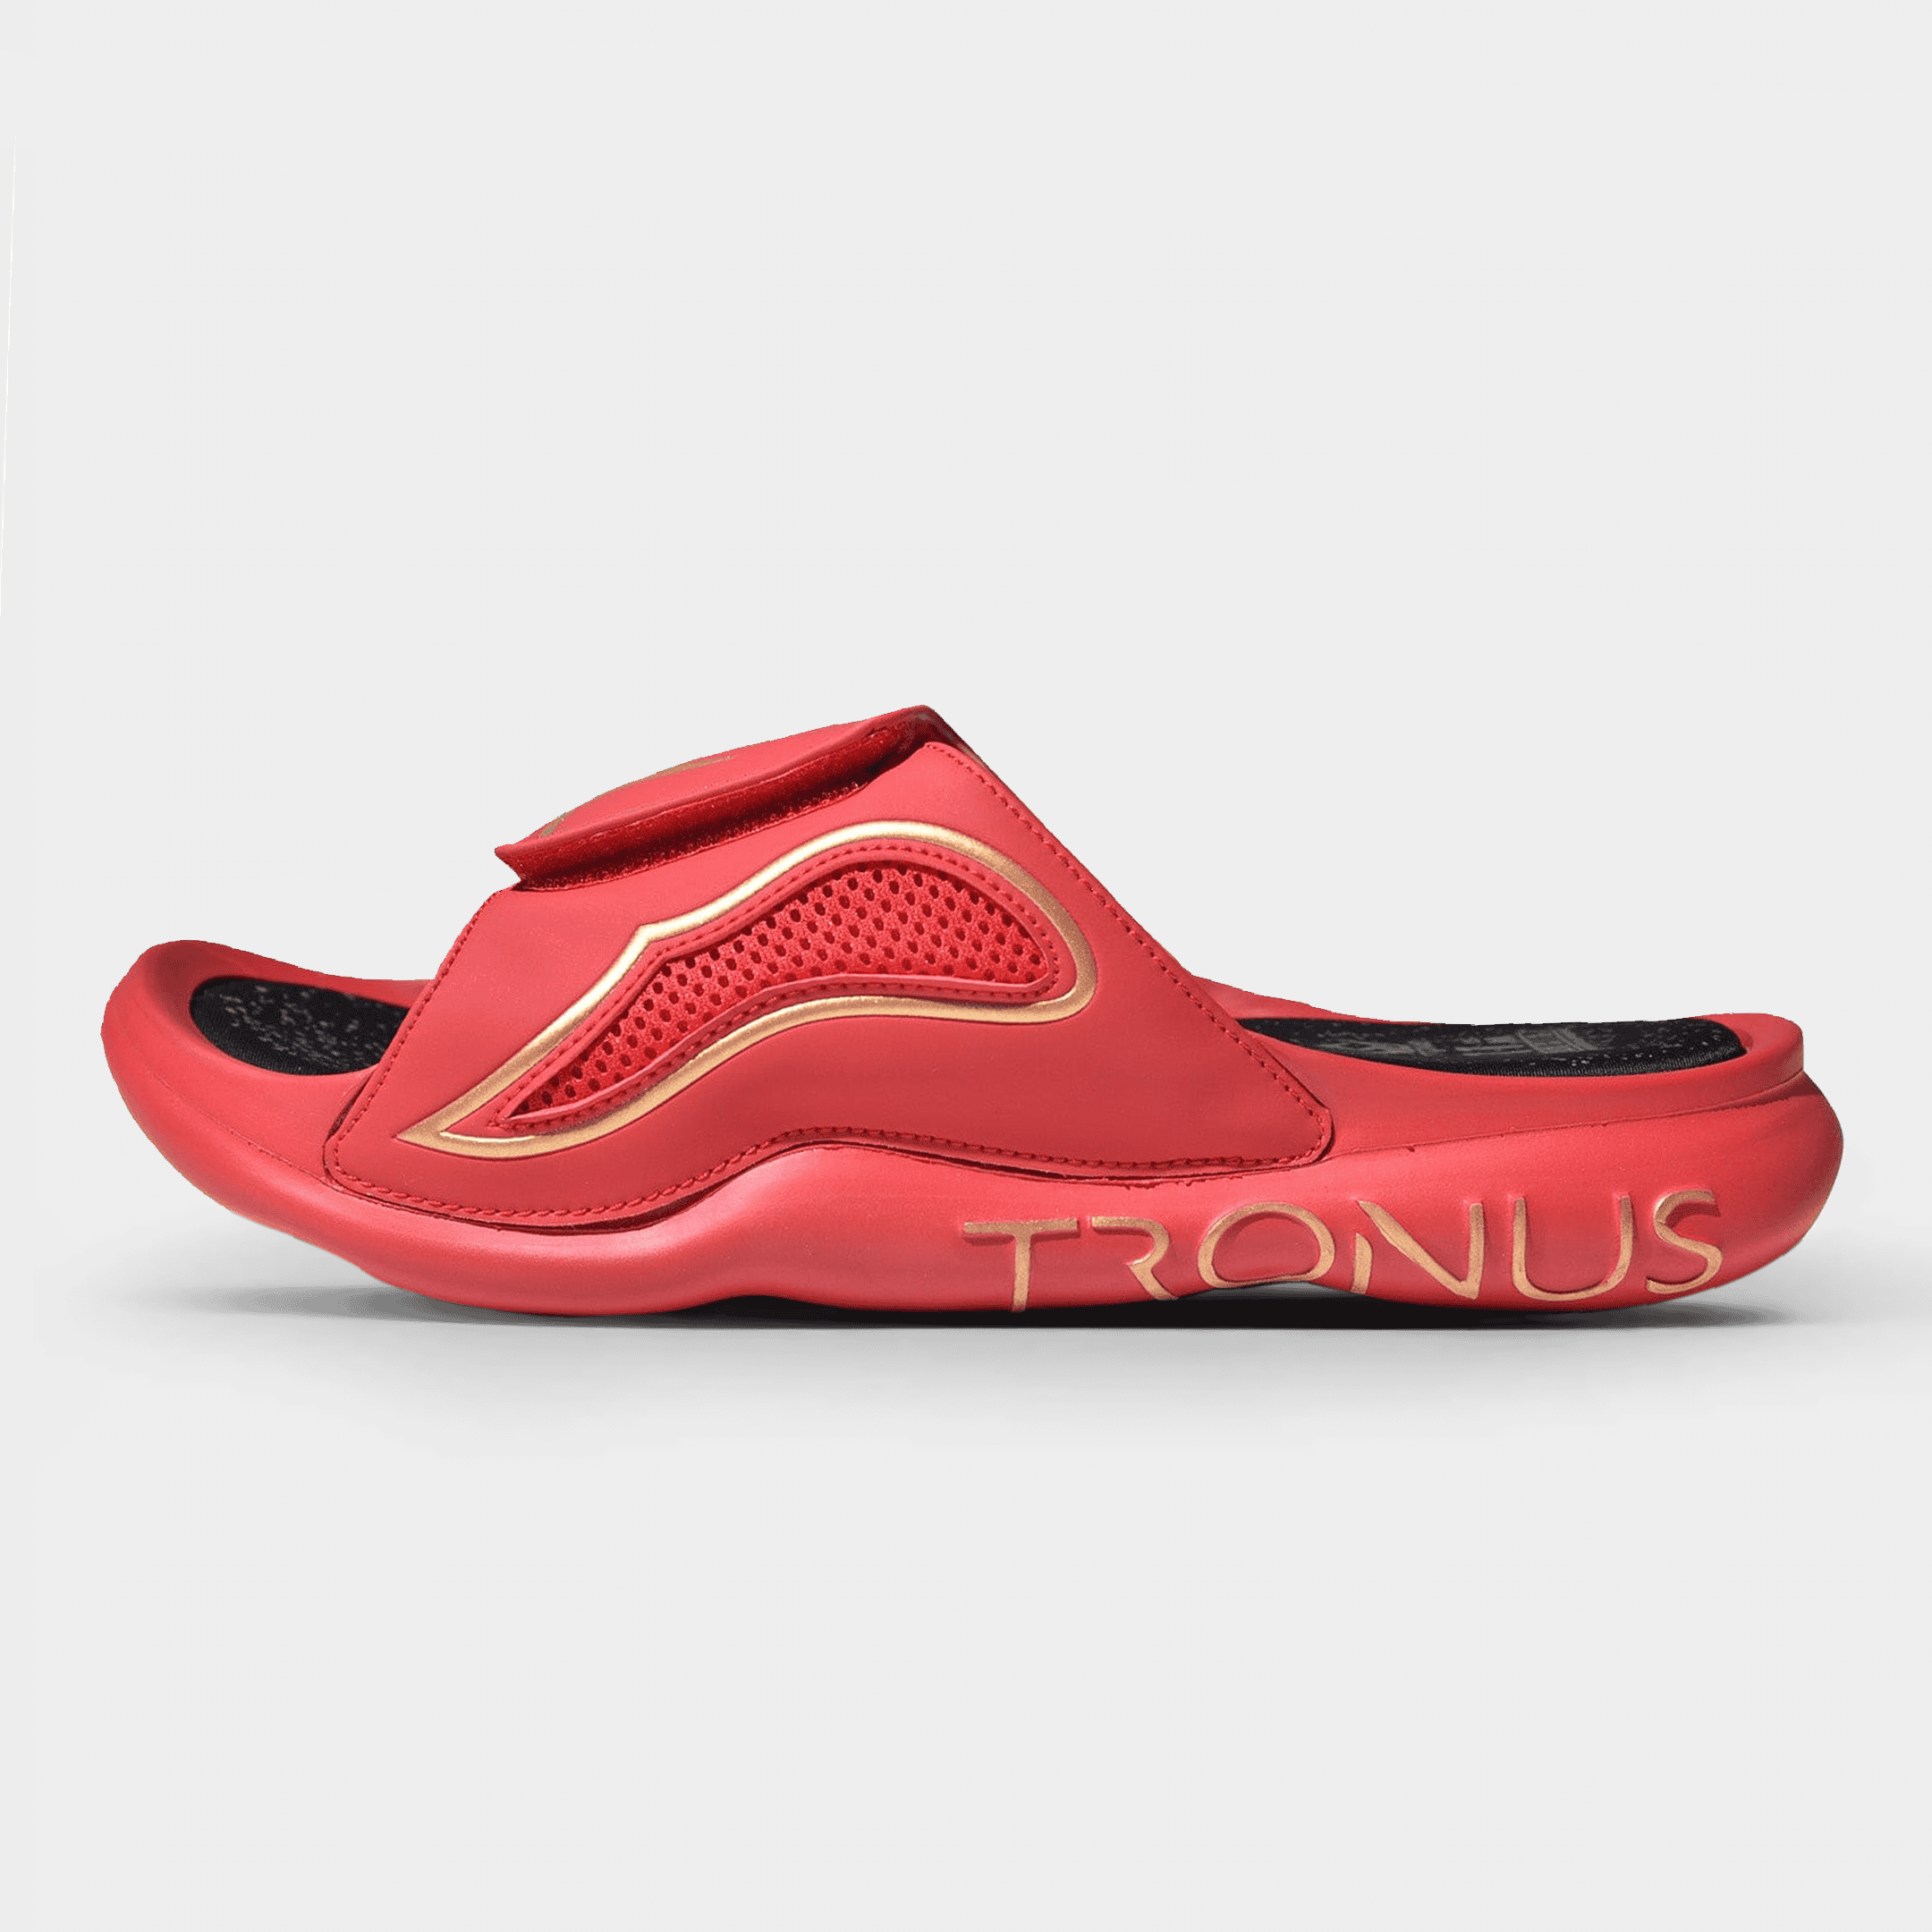 tronus-prod-imgs-red.png